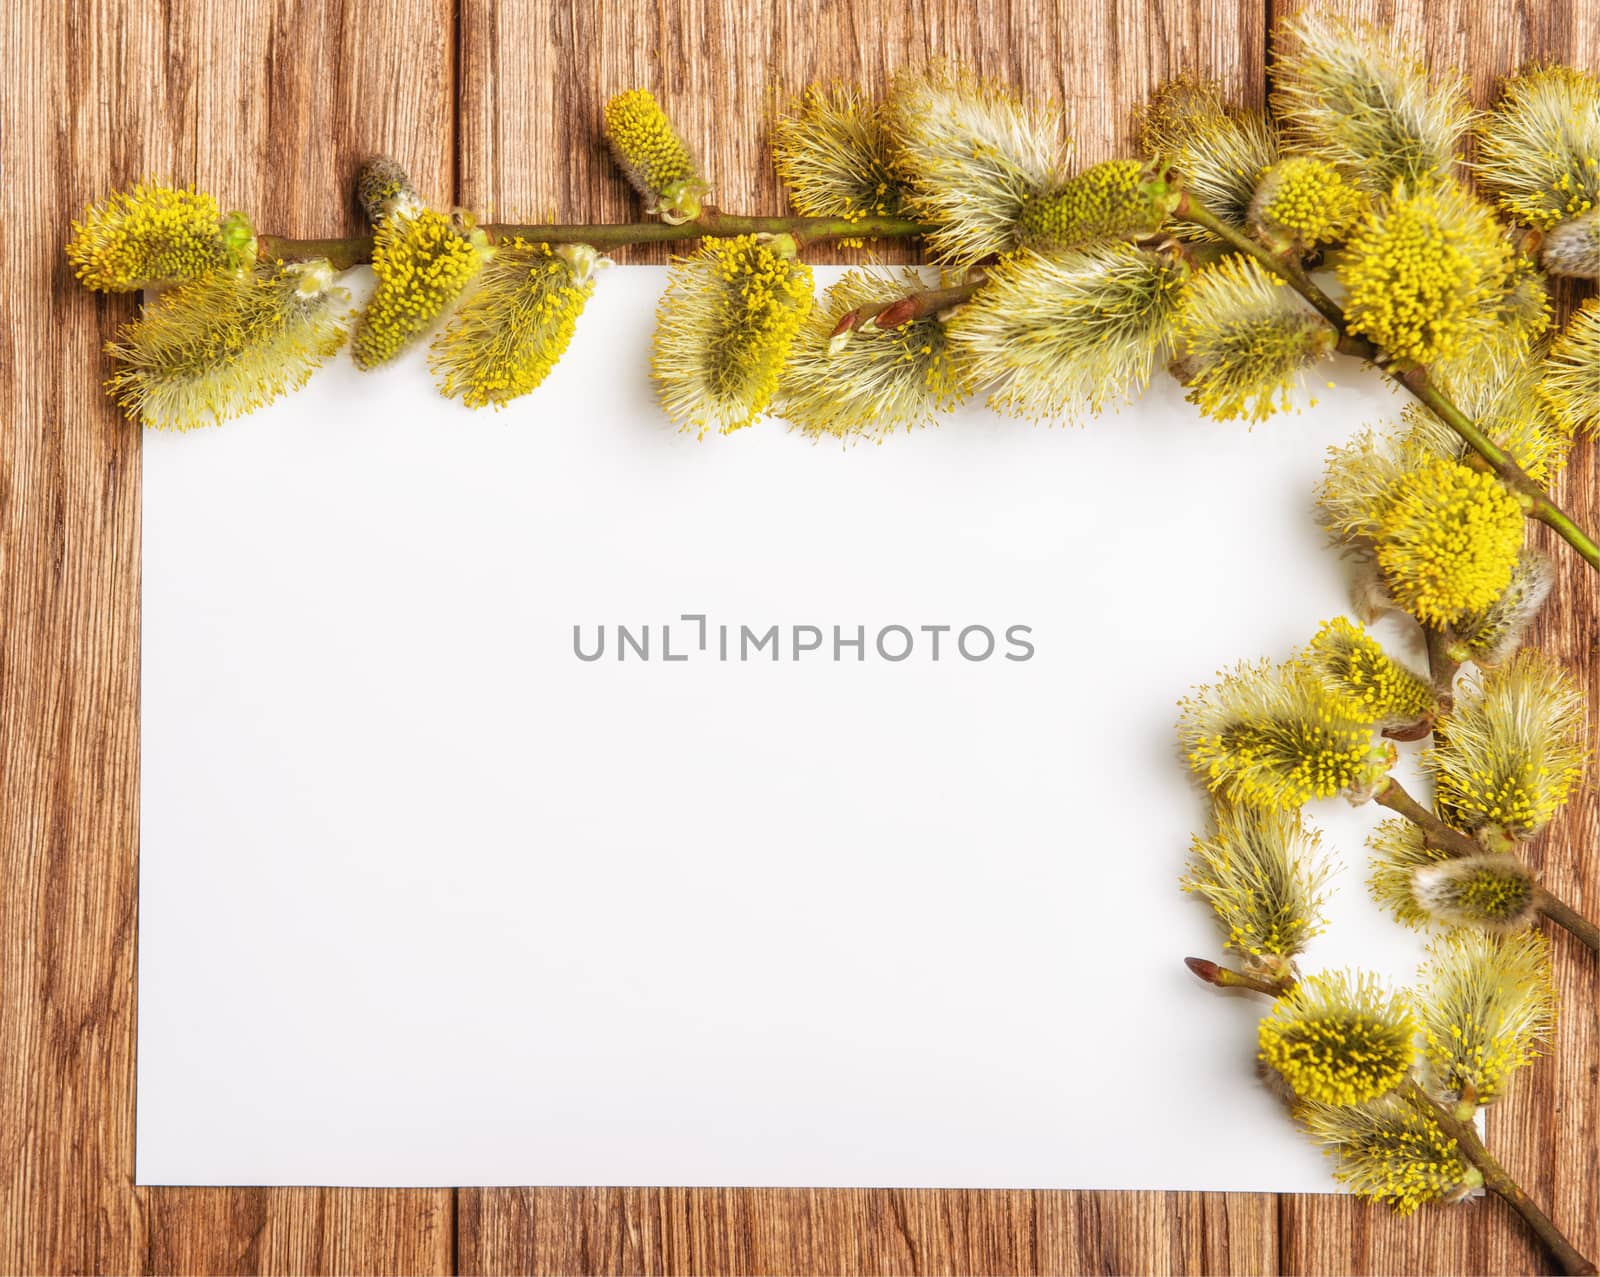 willow catkin on the old wooden table and paper blank by Draw05